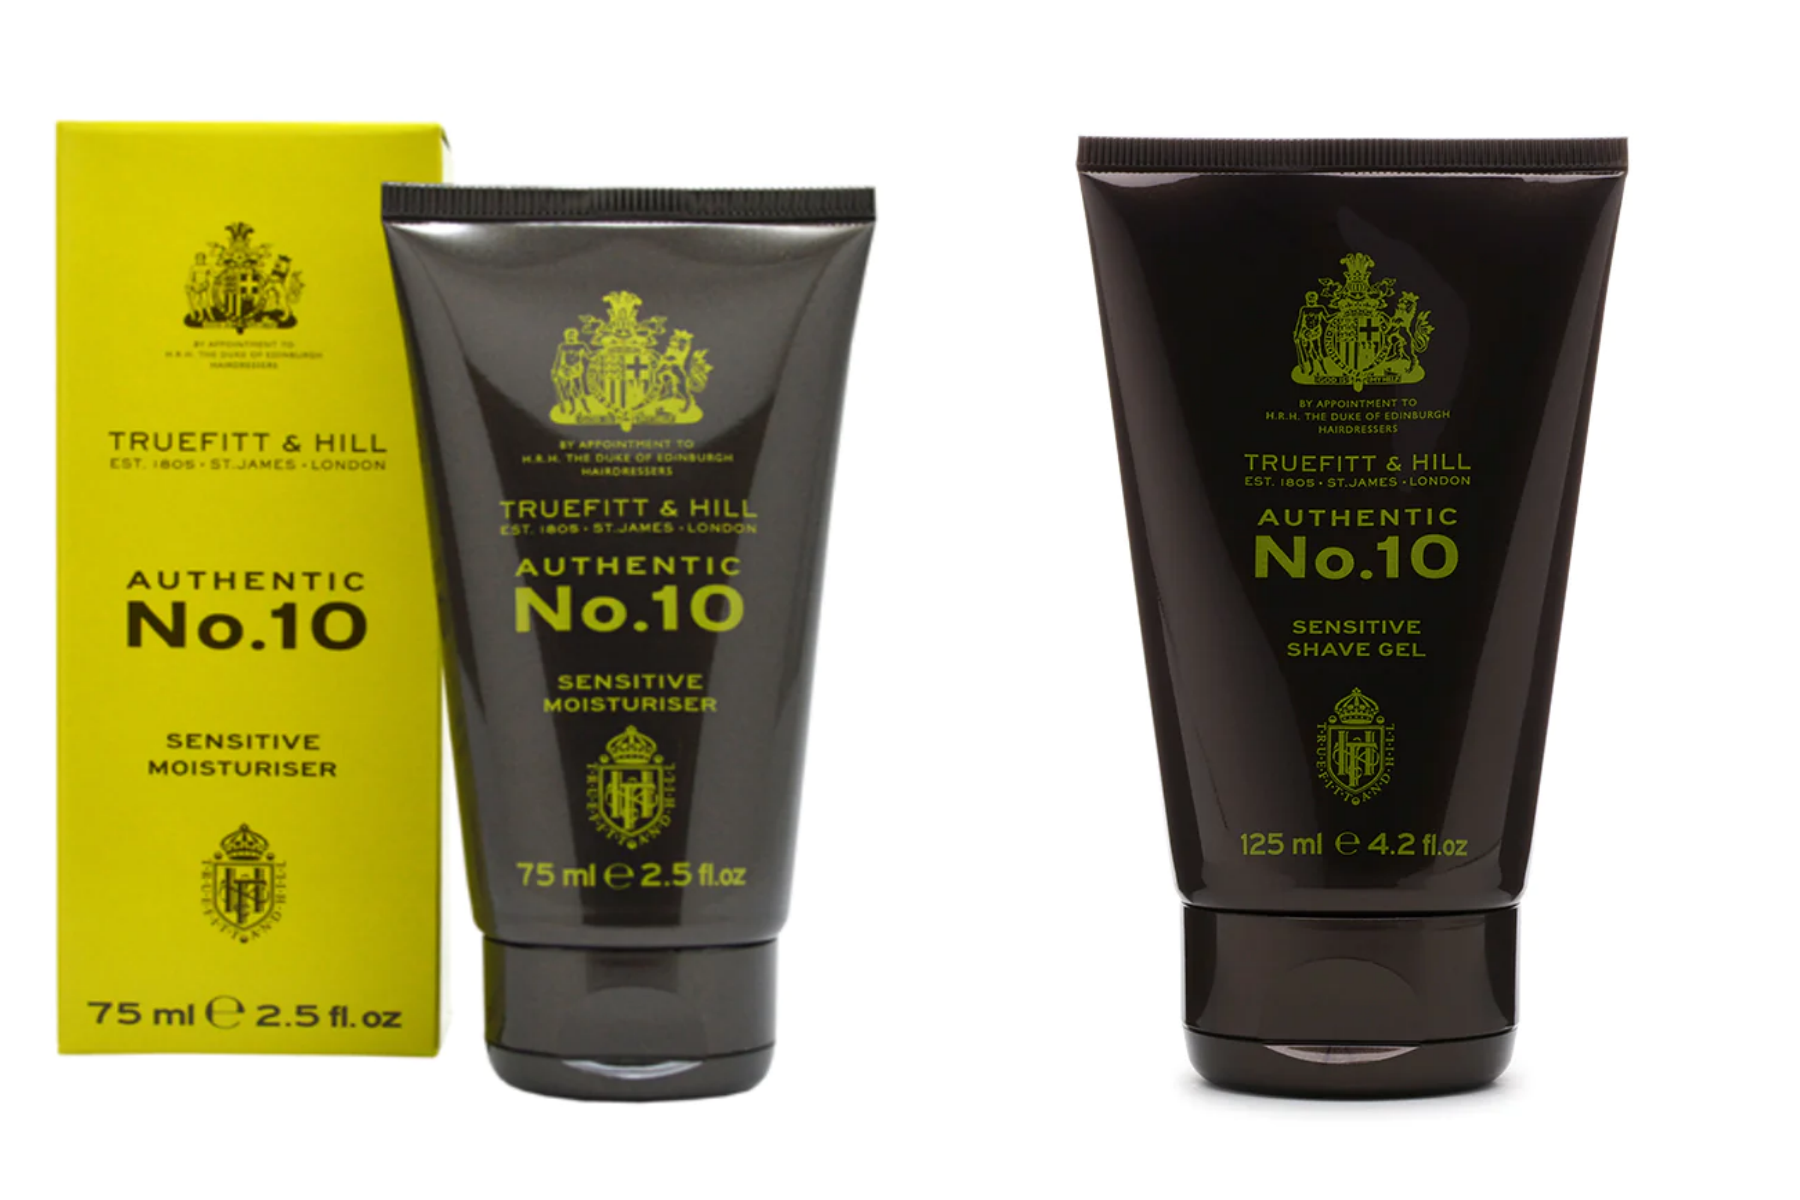 No.10 Gift Set with Shave Gel and Moisturiser